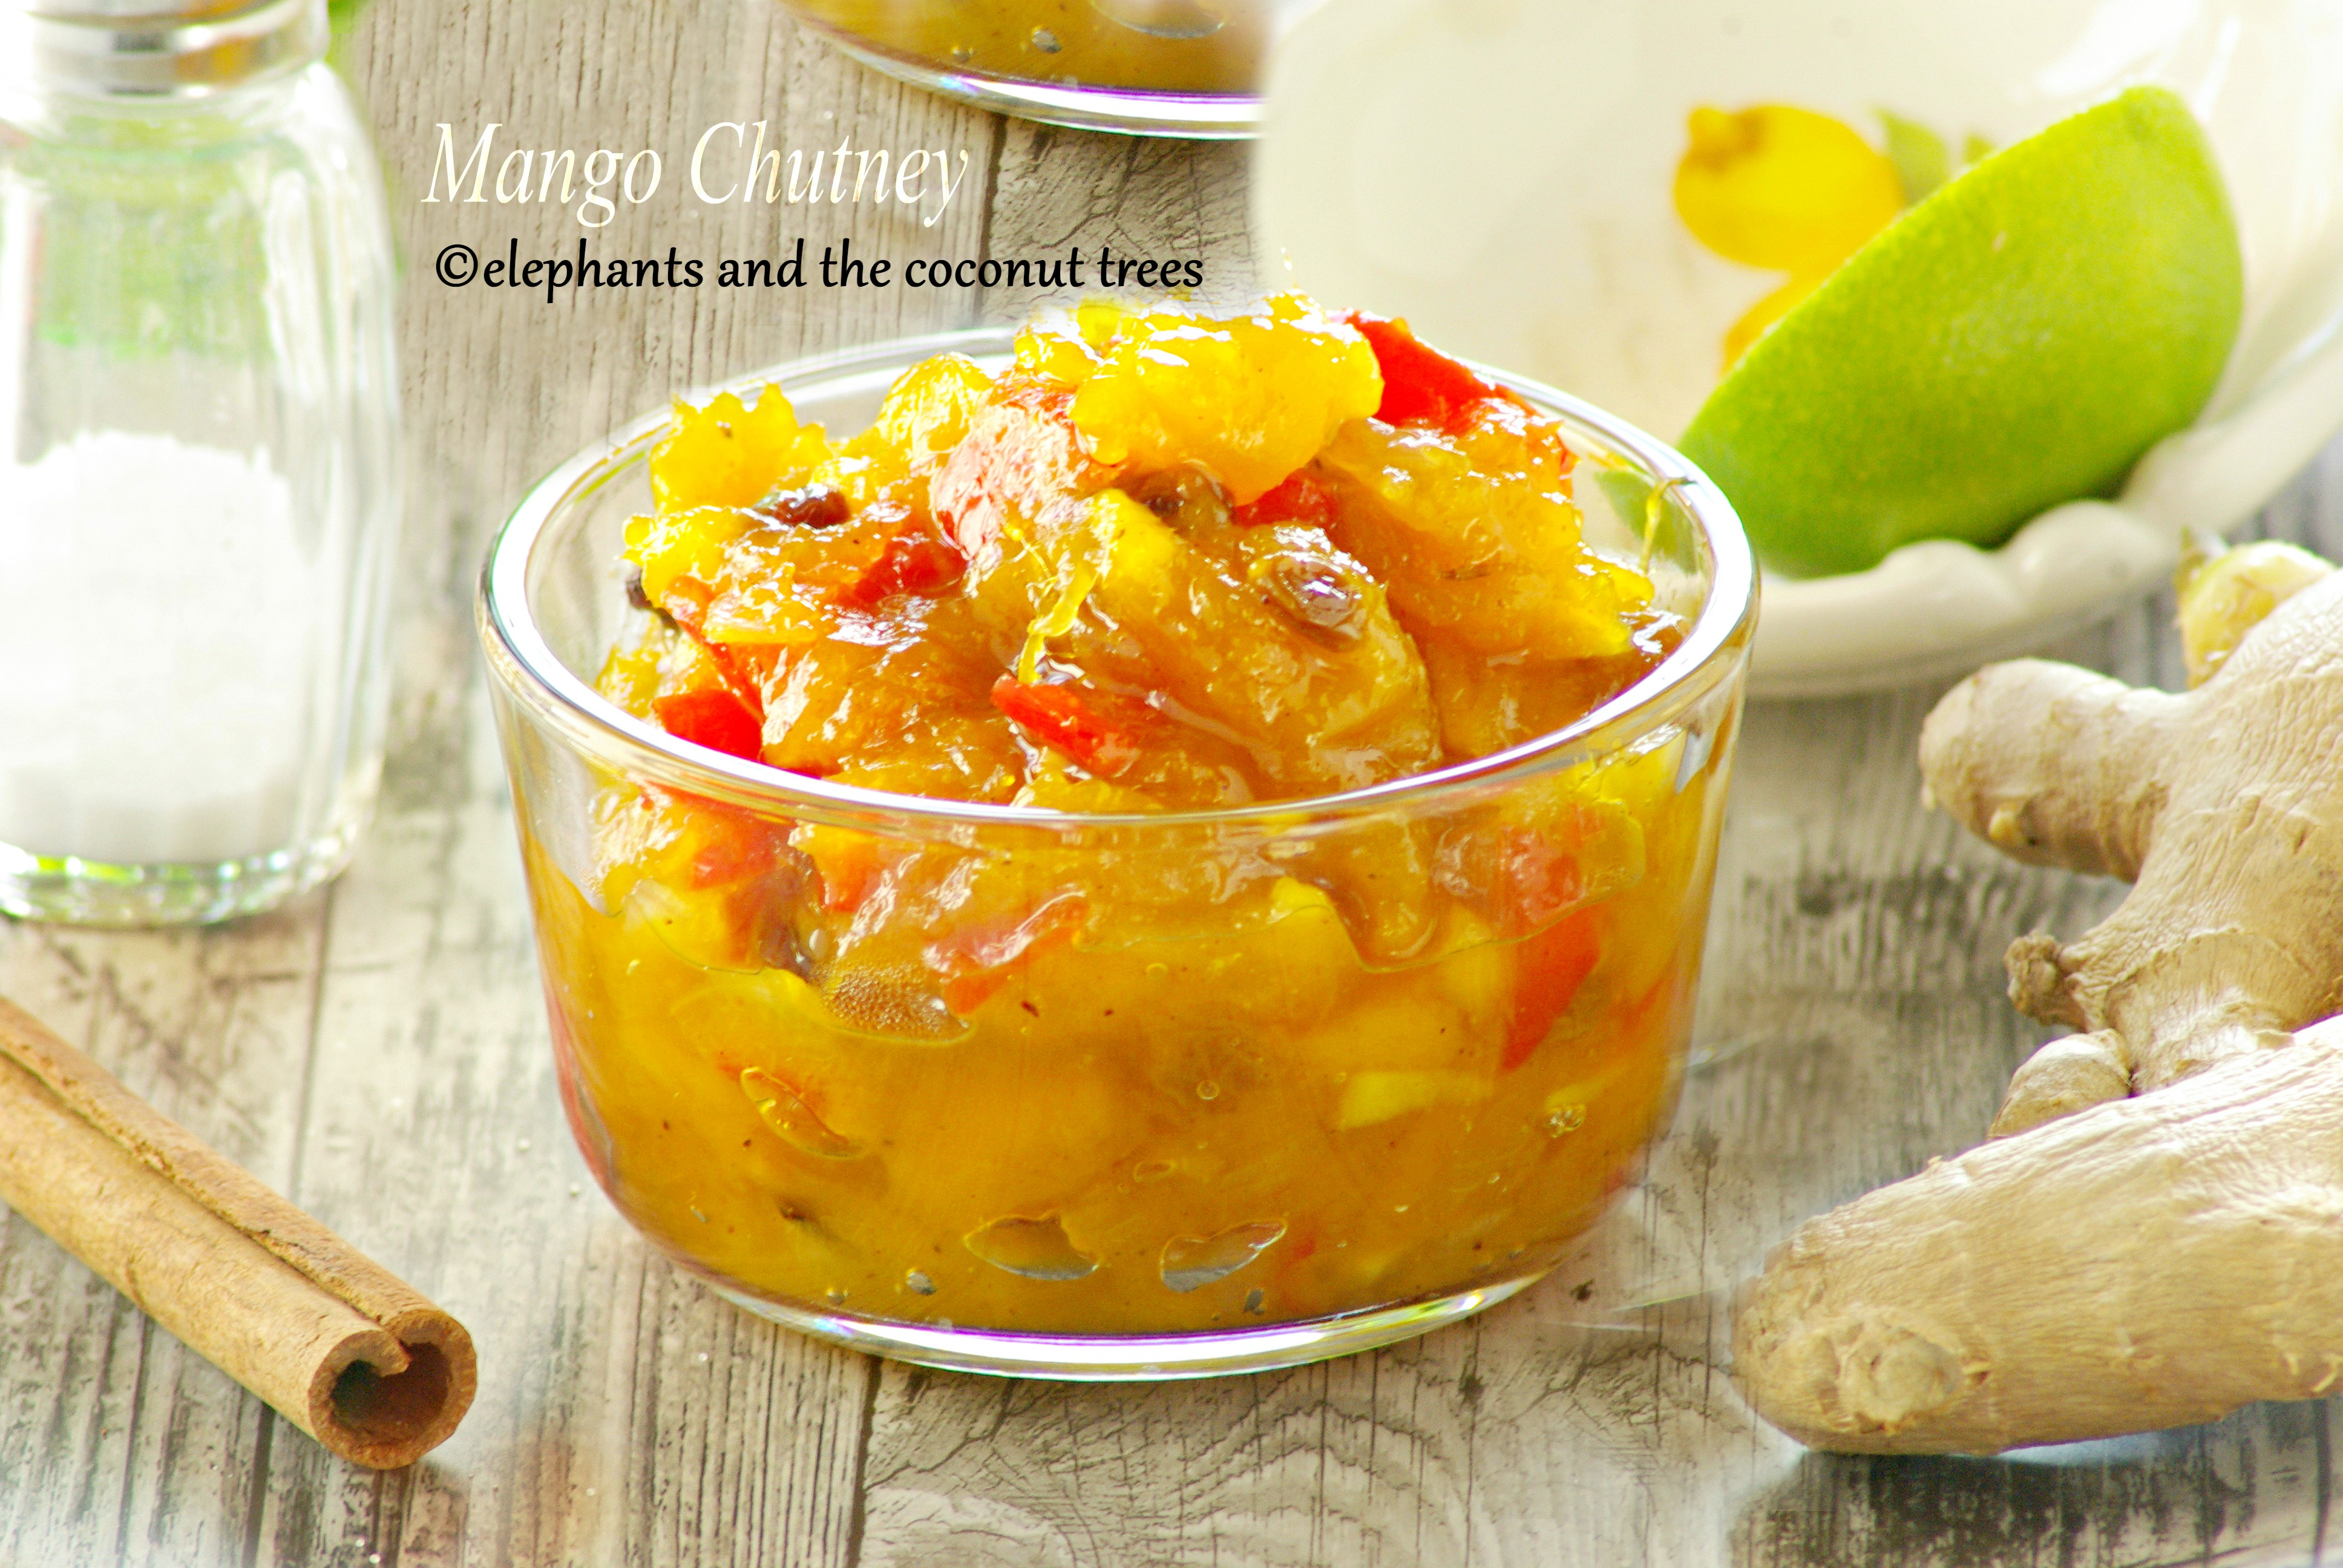 Mango chutney, sweet condiment with a hint of savory and spice